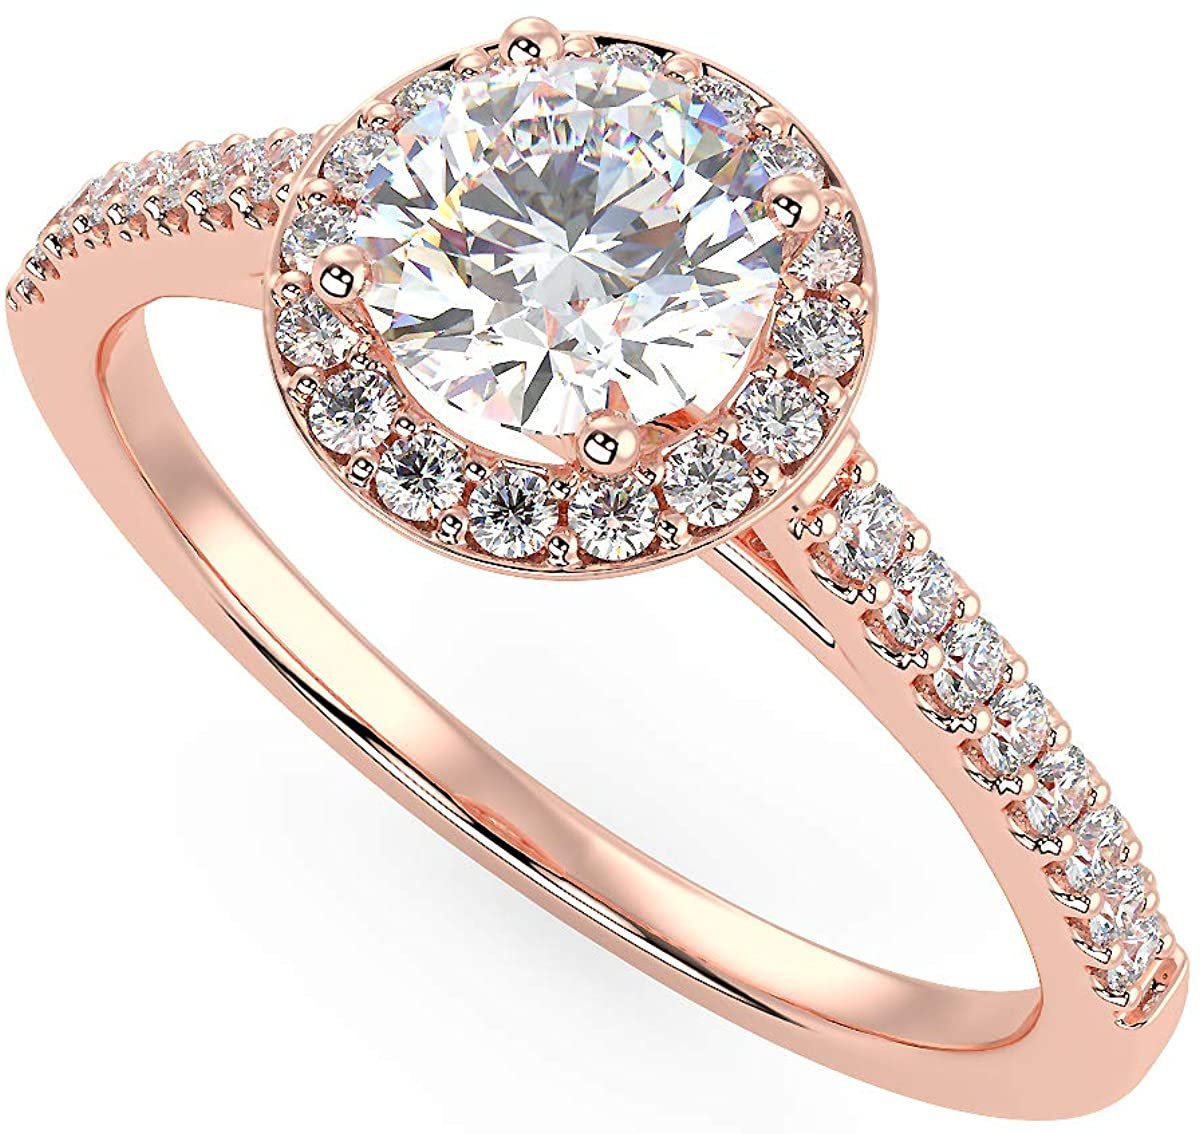 IGI Certified 14K Rose Gold 1.05 Cttw Round Brilliant-Cut Lab Created Diamond Halo Engagement Ring with Micro Pavé Band (Center Stone: G-H Color, VS1-VS2 Clarity) - Size 6-1/4